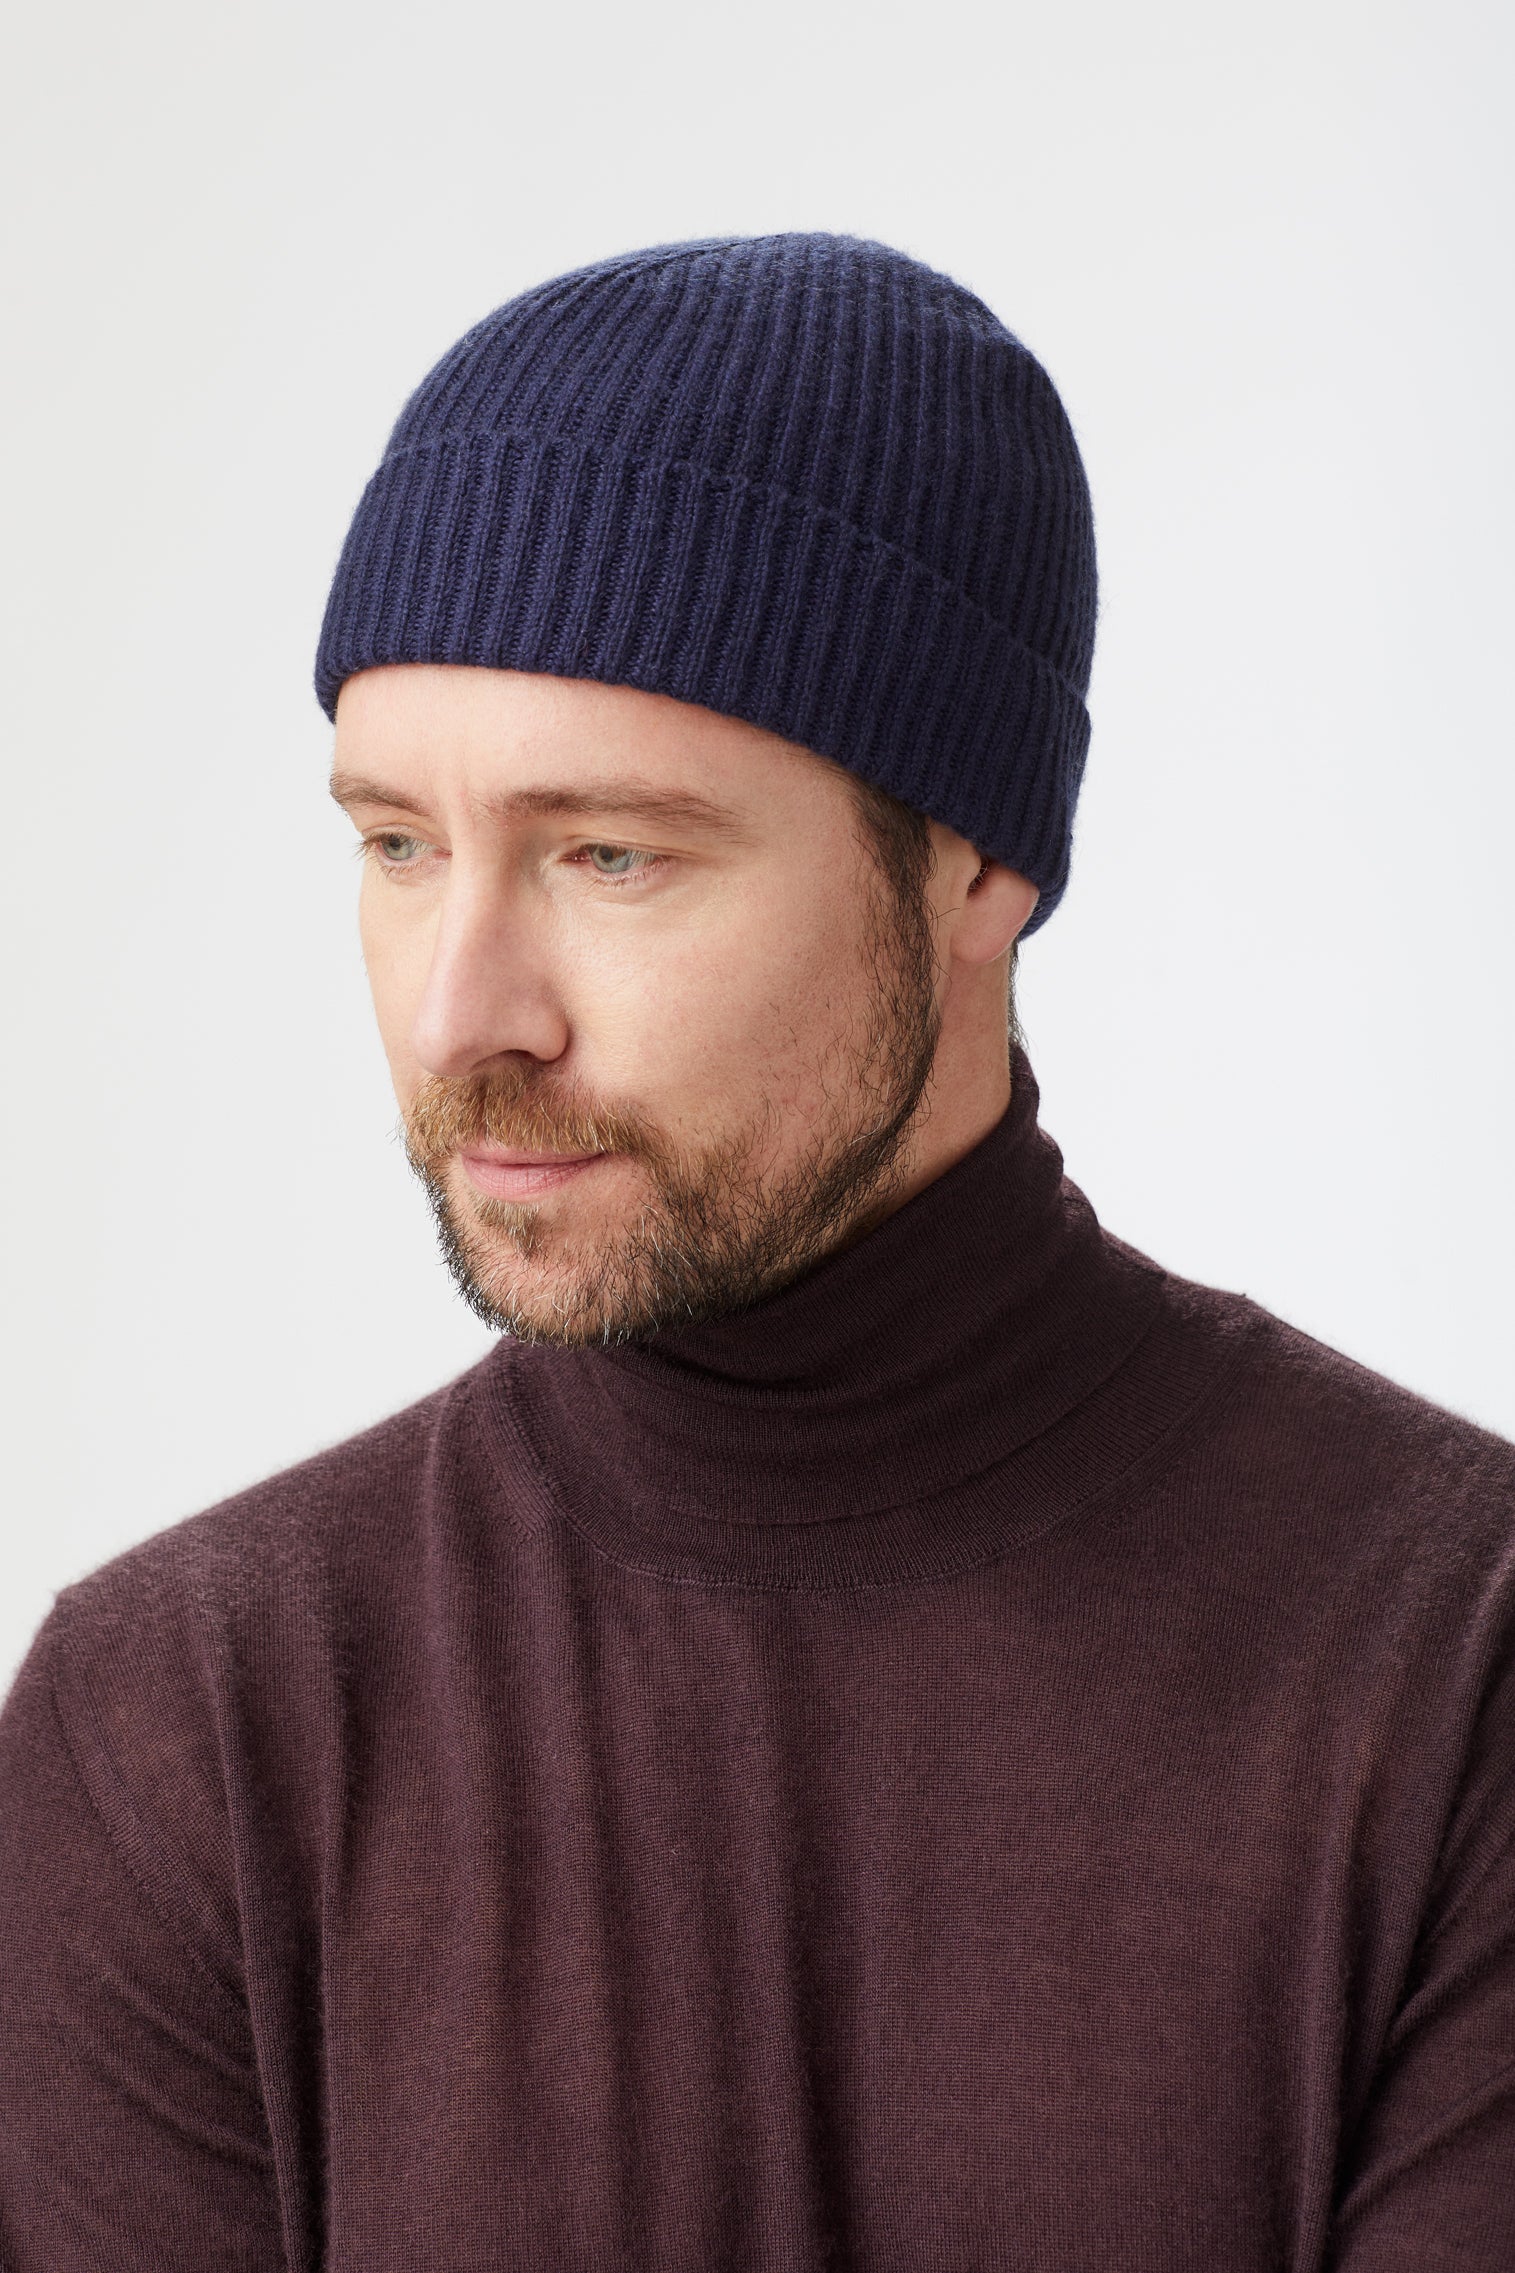 Blue Cashmere Ski Beanie - Hats for Oval Face Shapes - Lock & Co. Hatters London UK